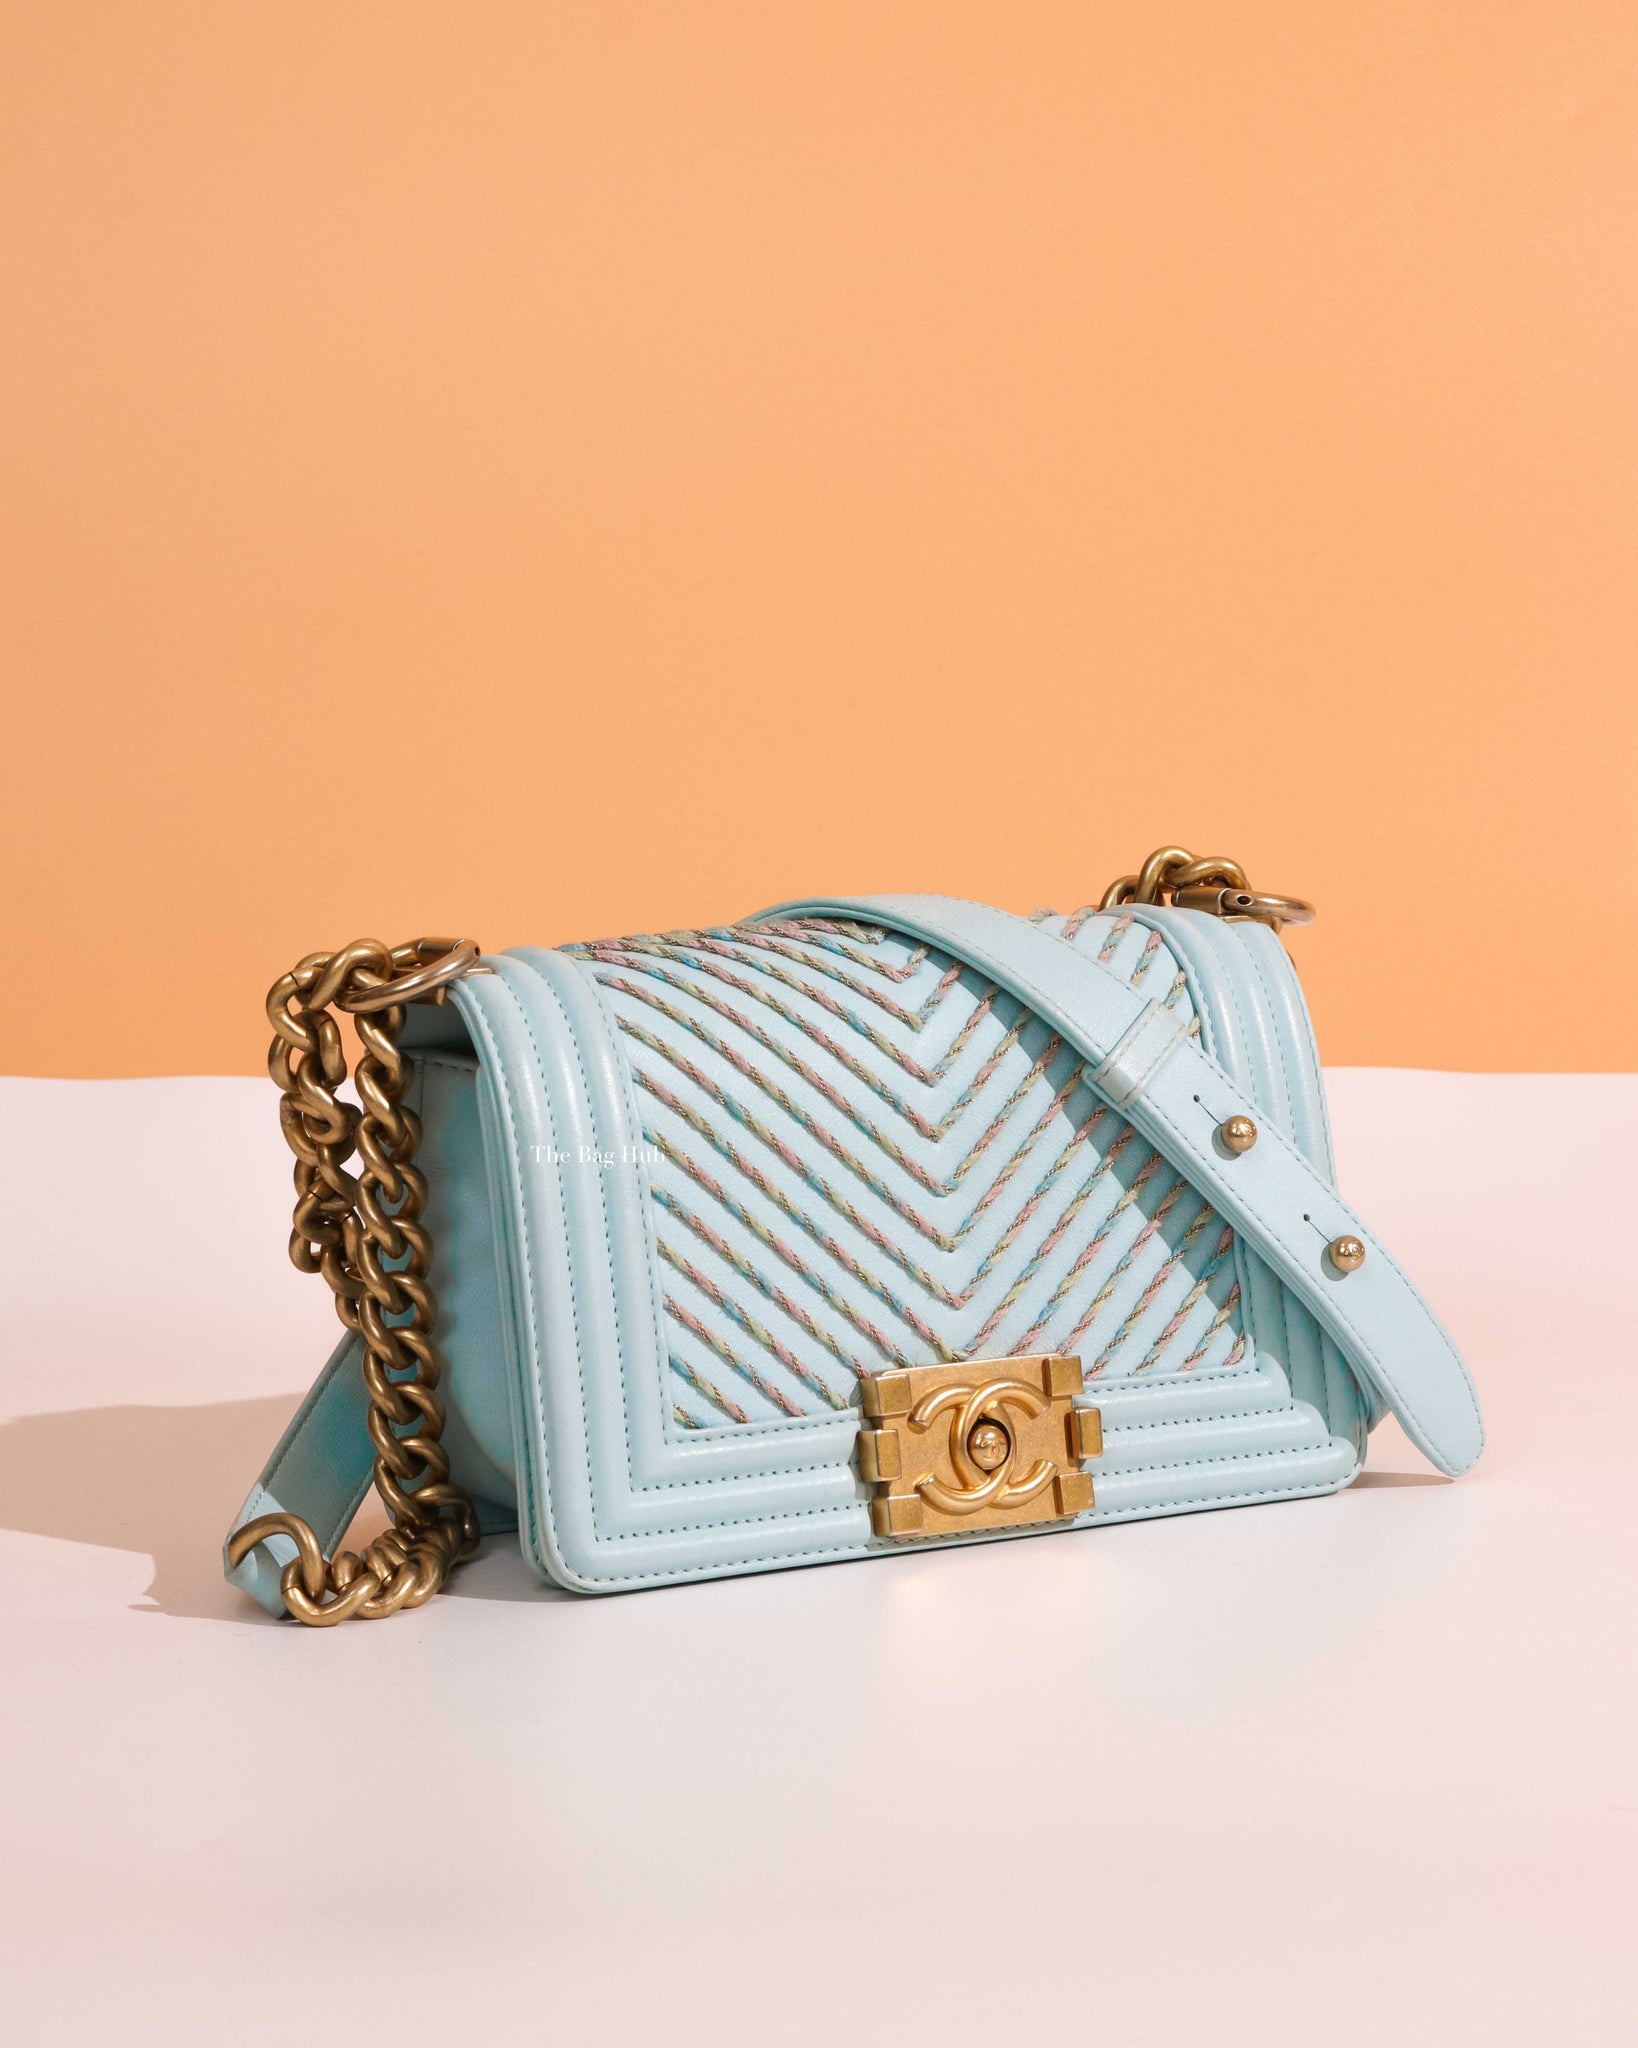 Chanel Light Blue Chevron Embroidered By The Sea Small Le Boy Bag Ghw |  Designer Brand | Authentic Chanel | The Bag Hub